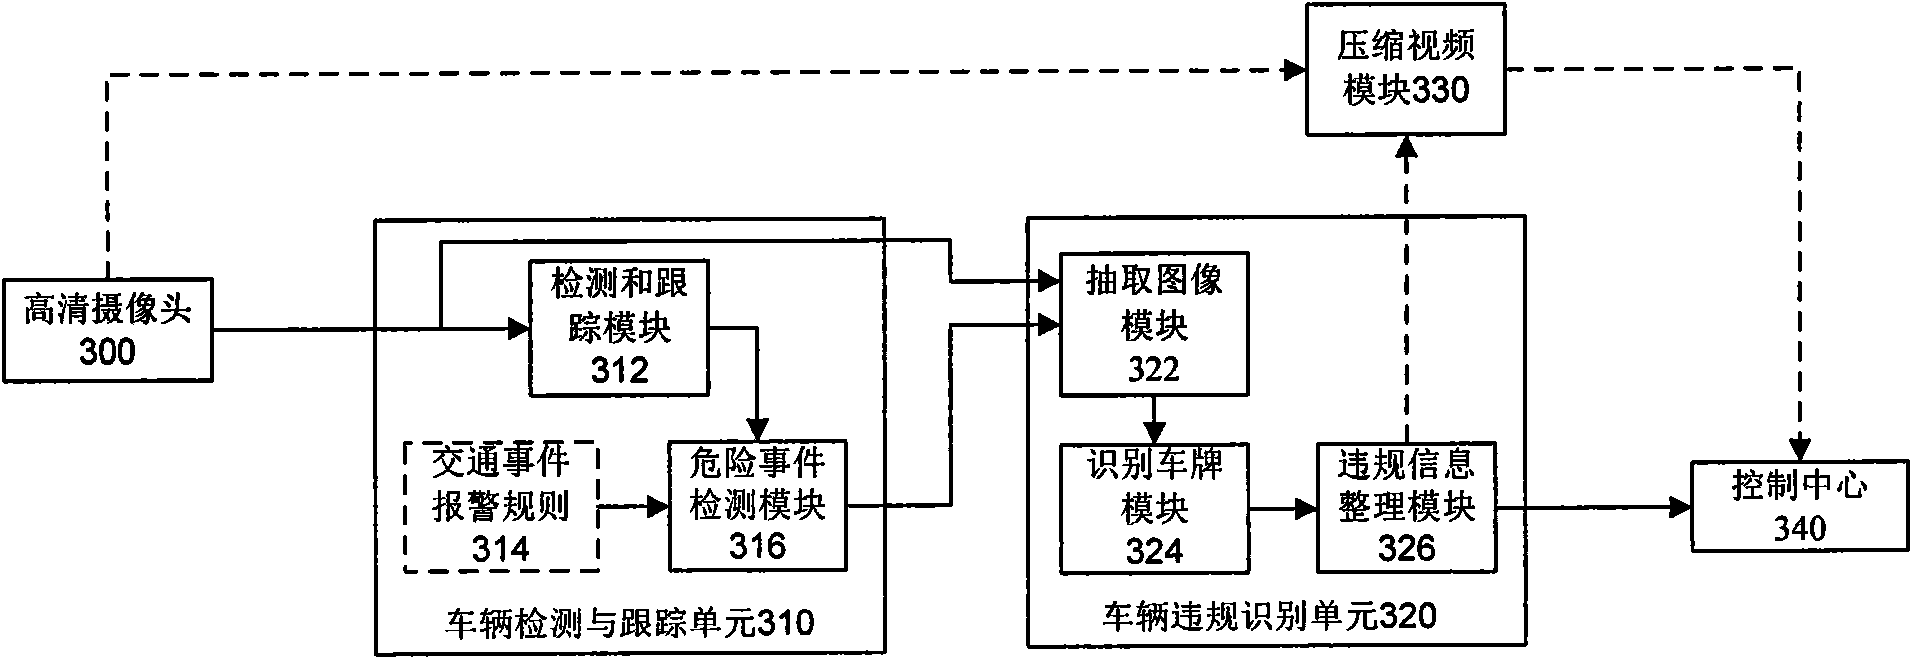 Automatic license plate recognition method and system